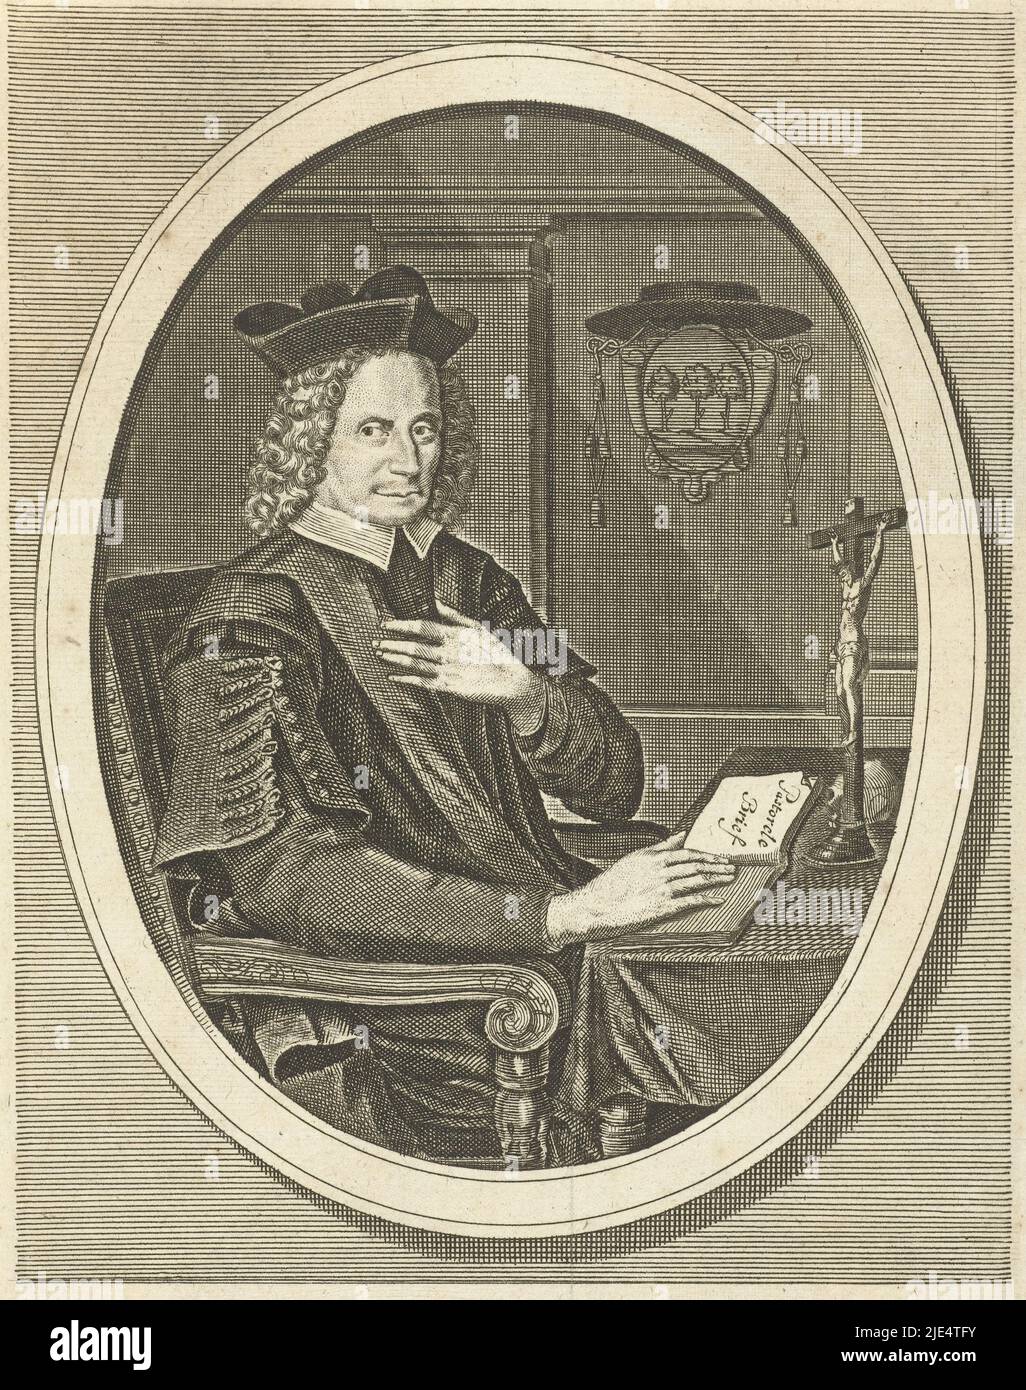 Portrait of Gerard Potcamp, pastor and archpriest of Lingen, sitting at a table with crucifix, on the wall hanging his coat of arms. Knee in oval frame, Portrait of Gerard Potcamp, pastor and archpriest of Lingen Reverendissimus dominus D. Gerardus Potcamp (...) 16 December Euisdem Anni, print maker: François van Bleyswijck, (mentioned on object), unknown, Leiden, 1681 - 1726, paper, etching, engraving, h 236 mm × w 142 mm Stock Photo